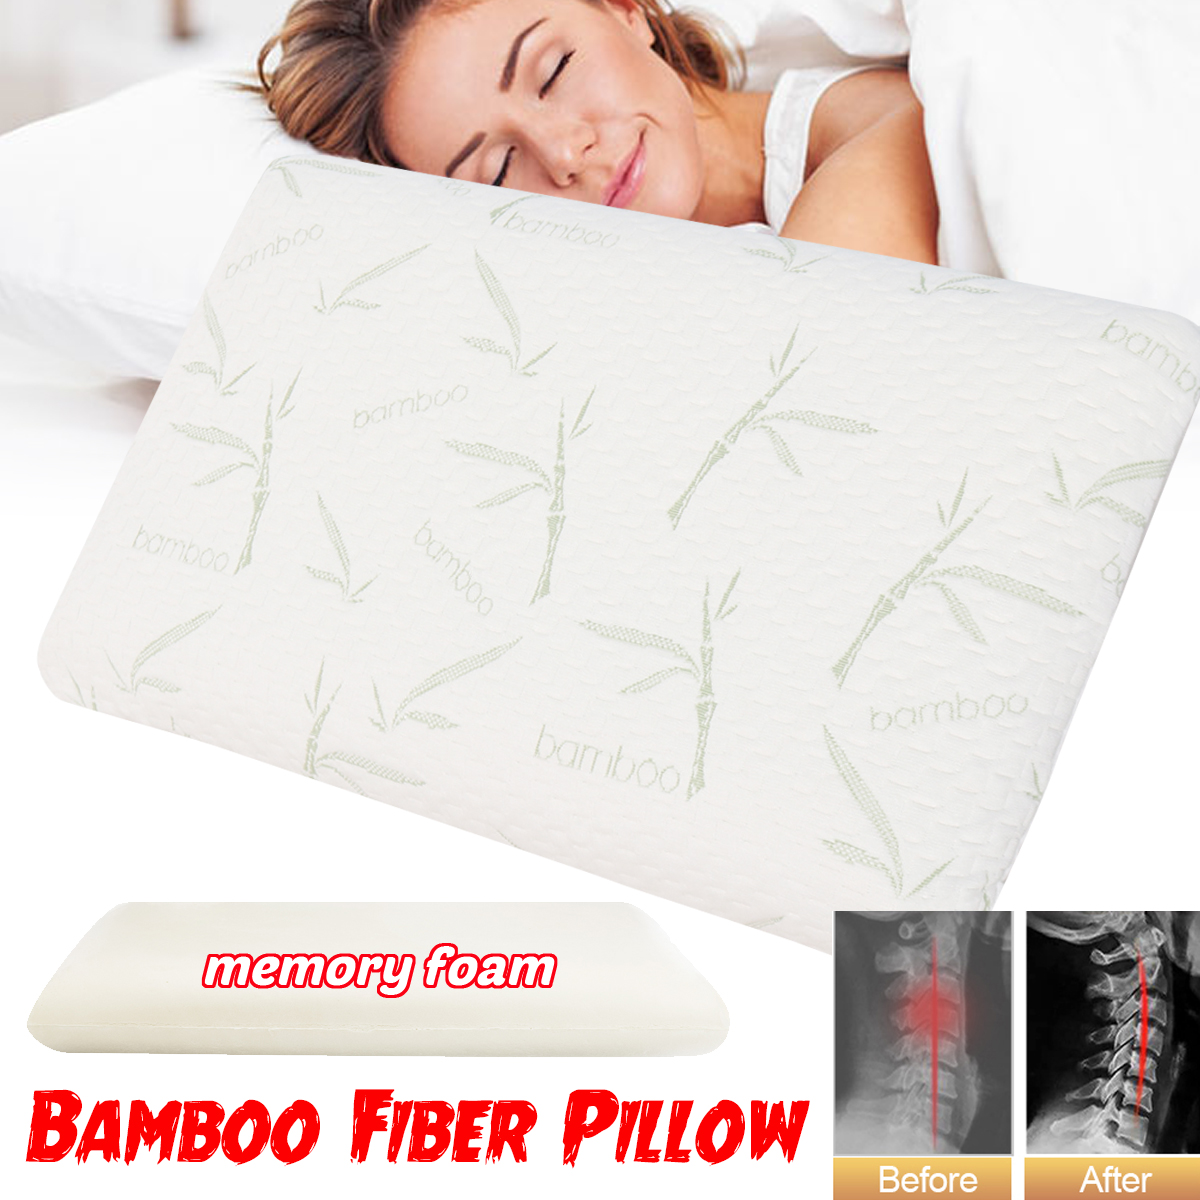 Bamboo-Memory-Foam-Pillow-Reversible-Pillow-Orthopedic-Slow-Rebound-Cervical-Neck-Pain-Relief-1813962-1